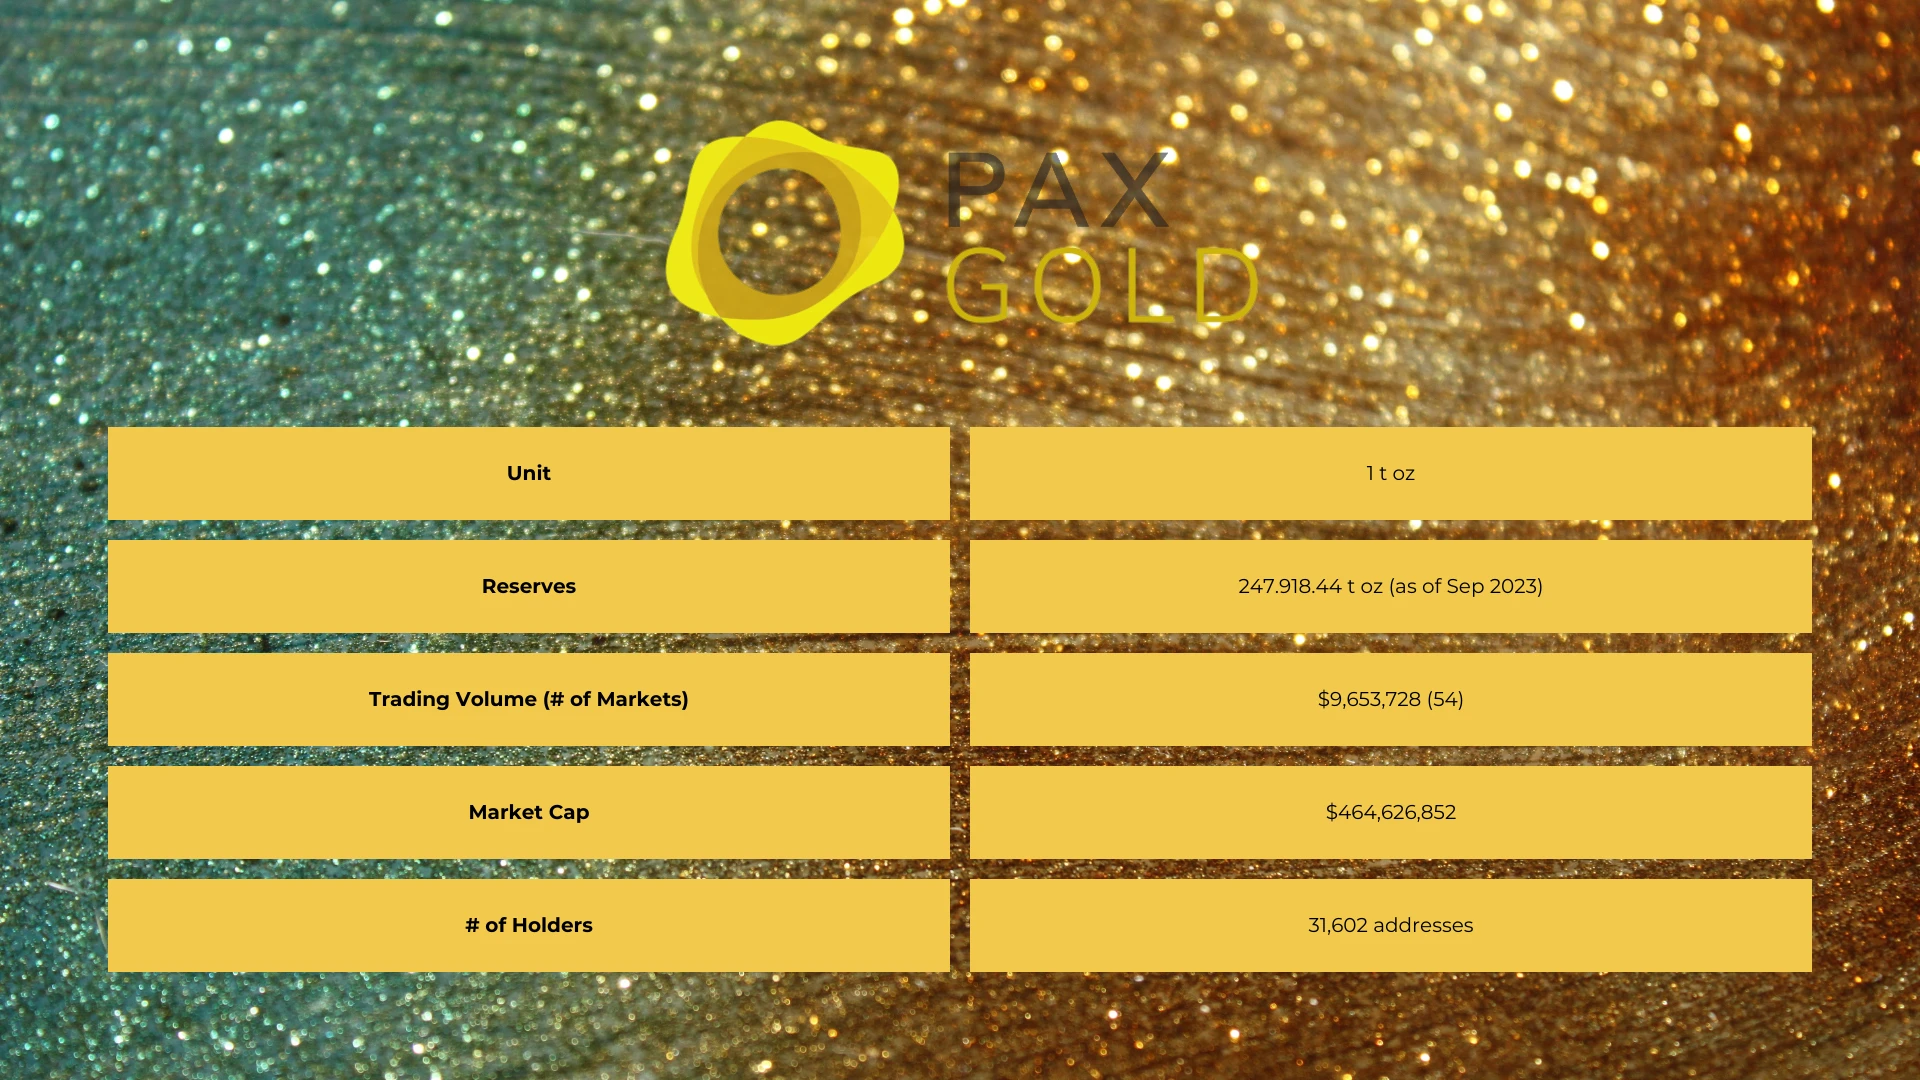 Pax gold in numbers. Unit - 1 t oz  Reserves - 247.918.44 t oz (as of Sep 2023)  Trading Volume (# of Markets) - $9,653,728 (54)  Market Cap - $464,626,852  Token Holders - 31,602 addresses